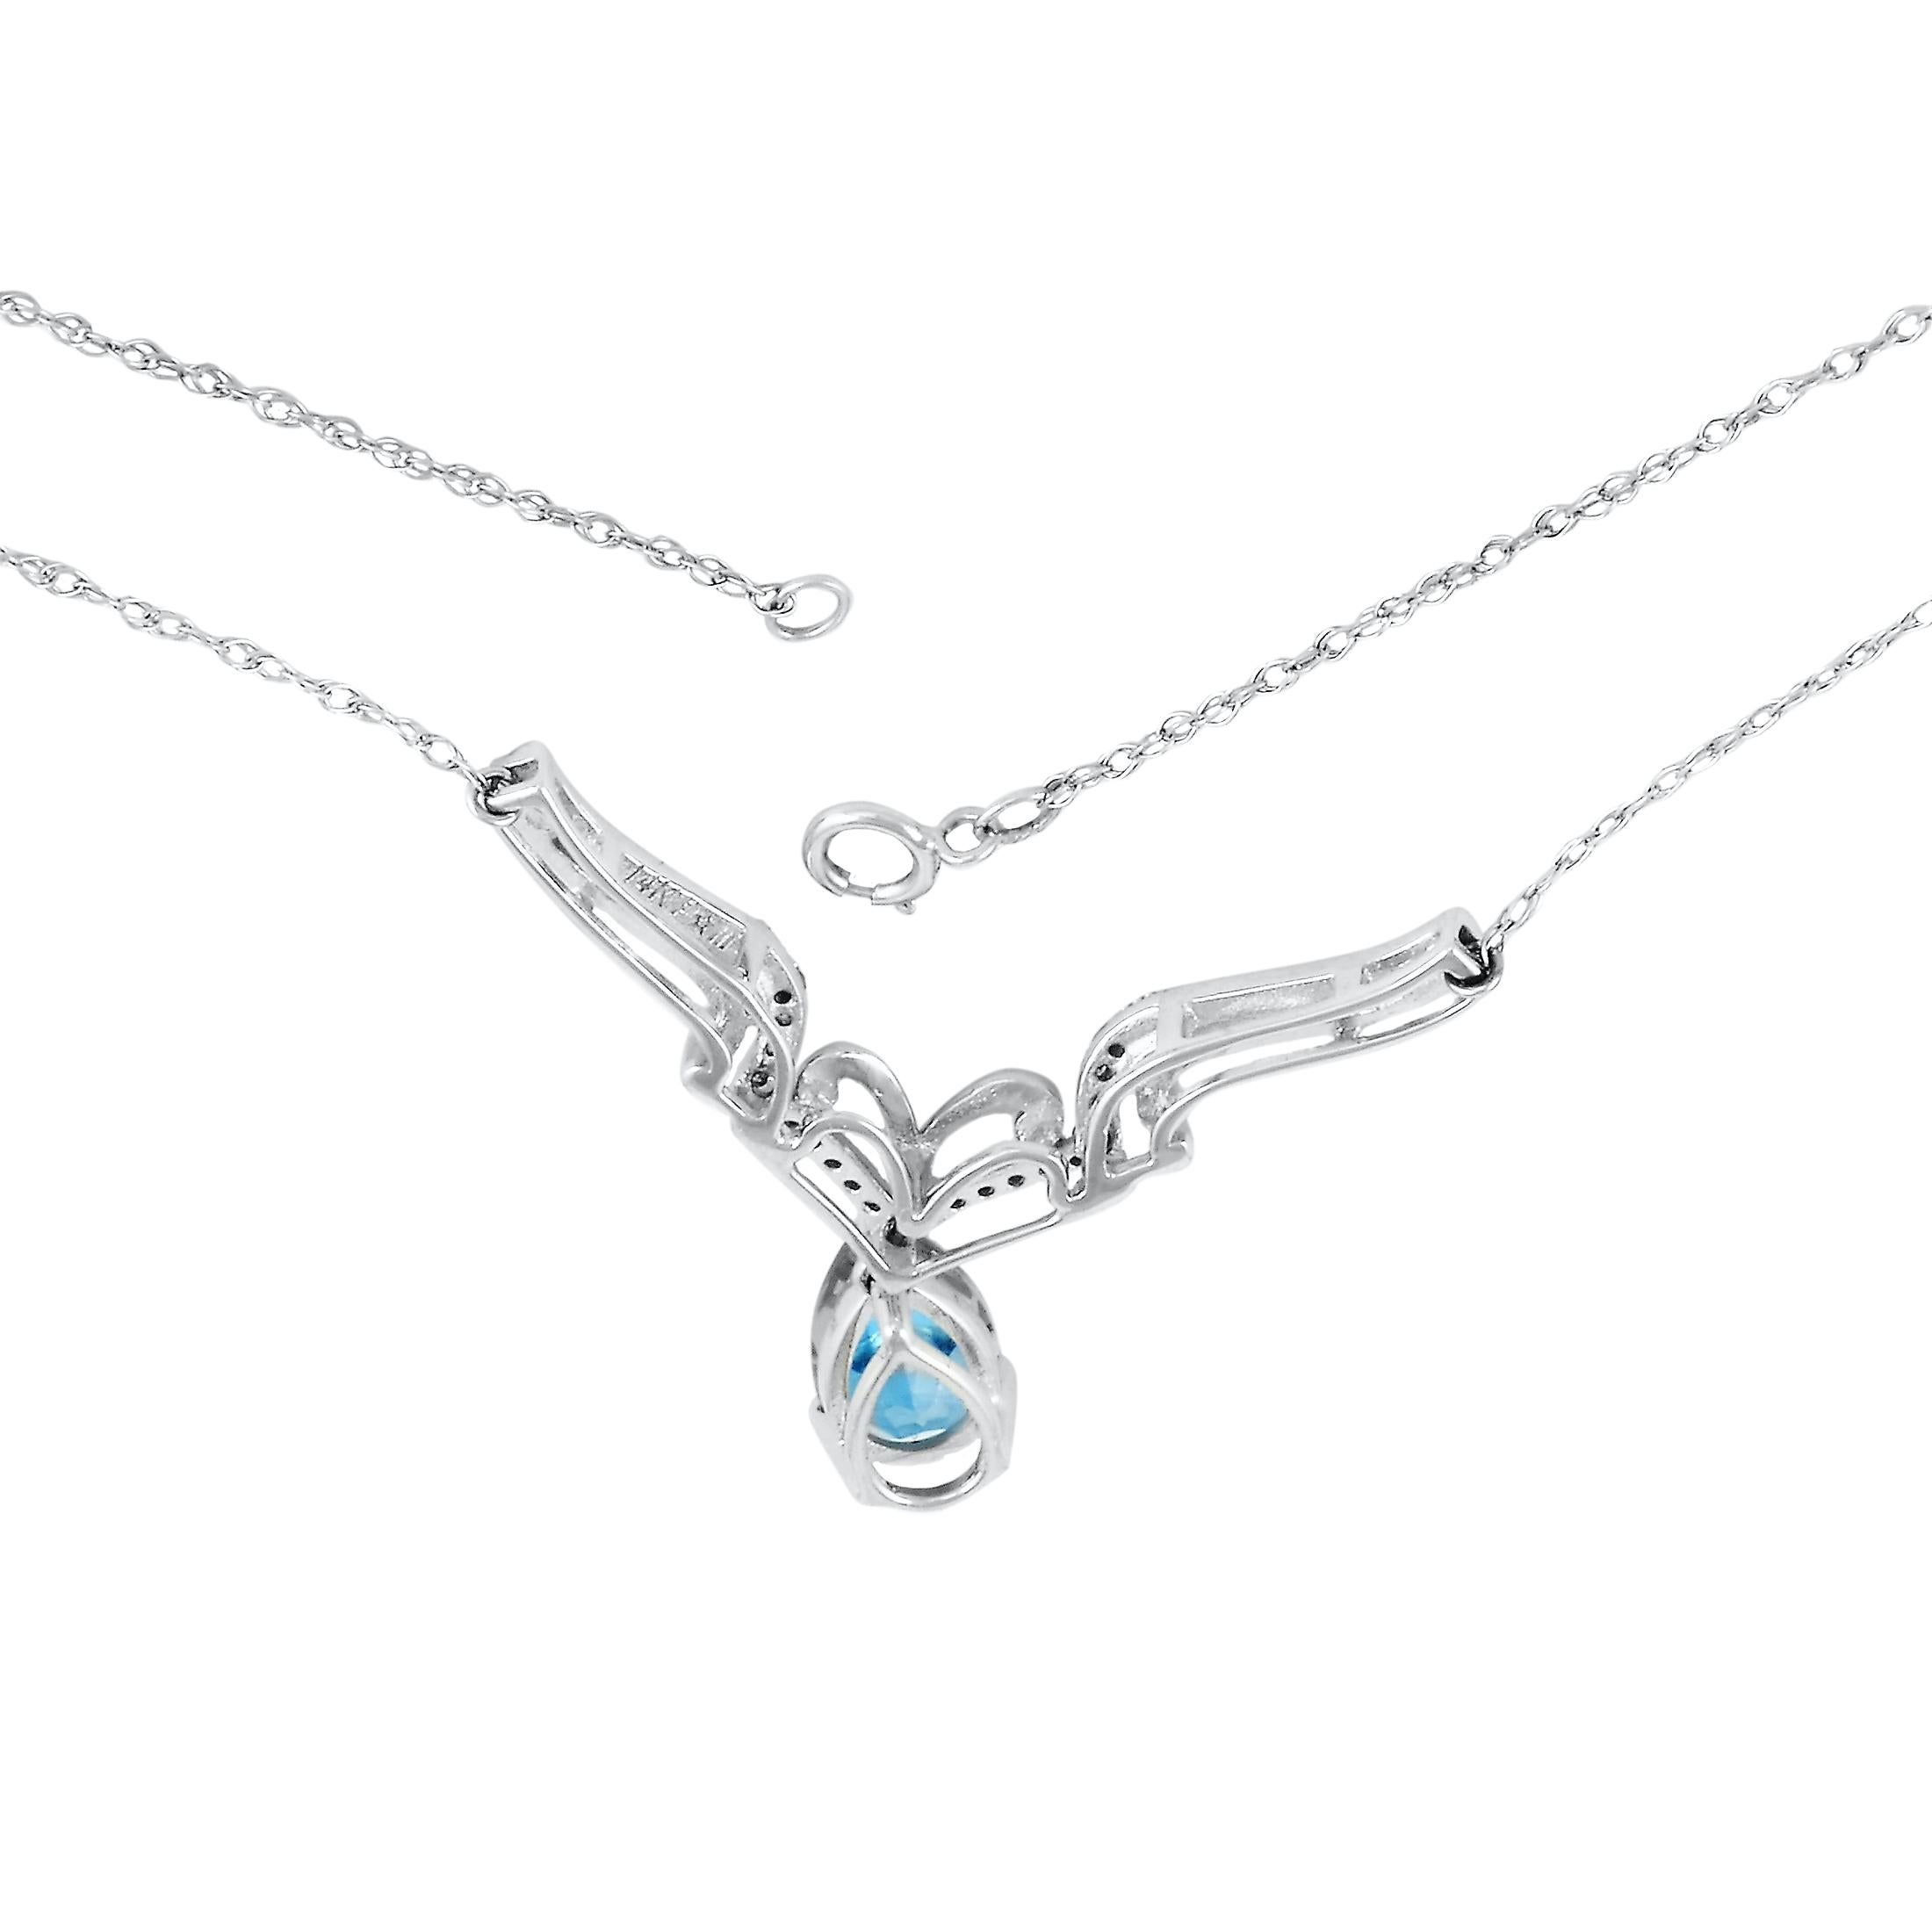 This LB Exclusive necklace is made of 14K white gold and weighs 3.2 grams. It is presented with a 15” chain and a pendant that measures 1” in length and 1” in width. The necklace is embellished with a blue topaz and a total of 0.10 carats of